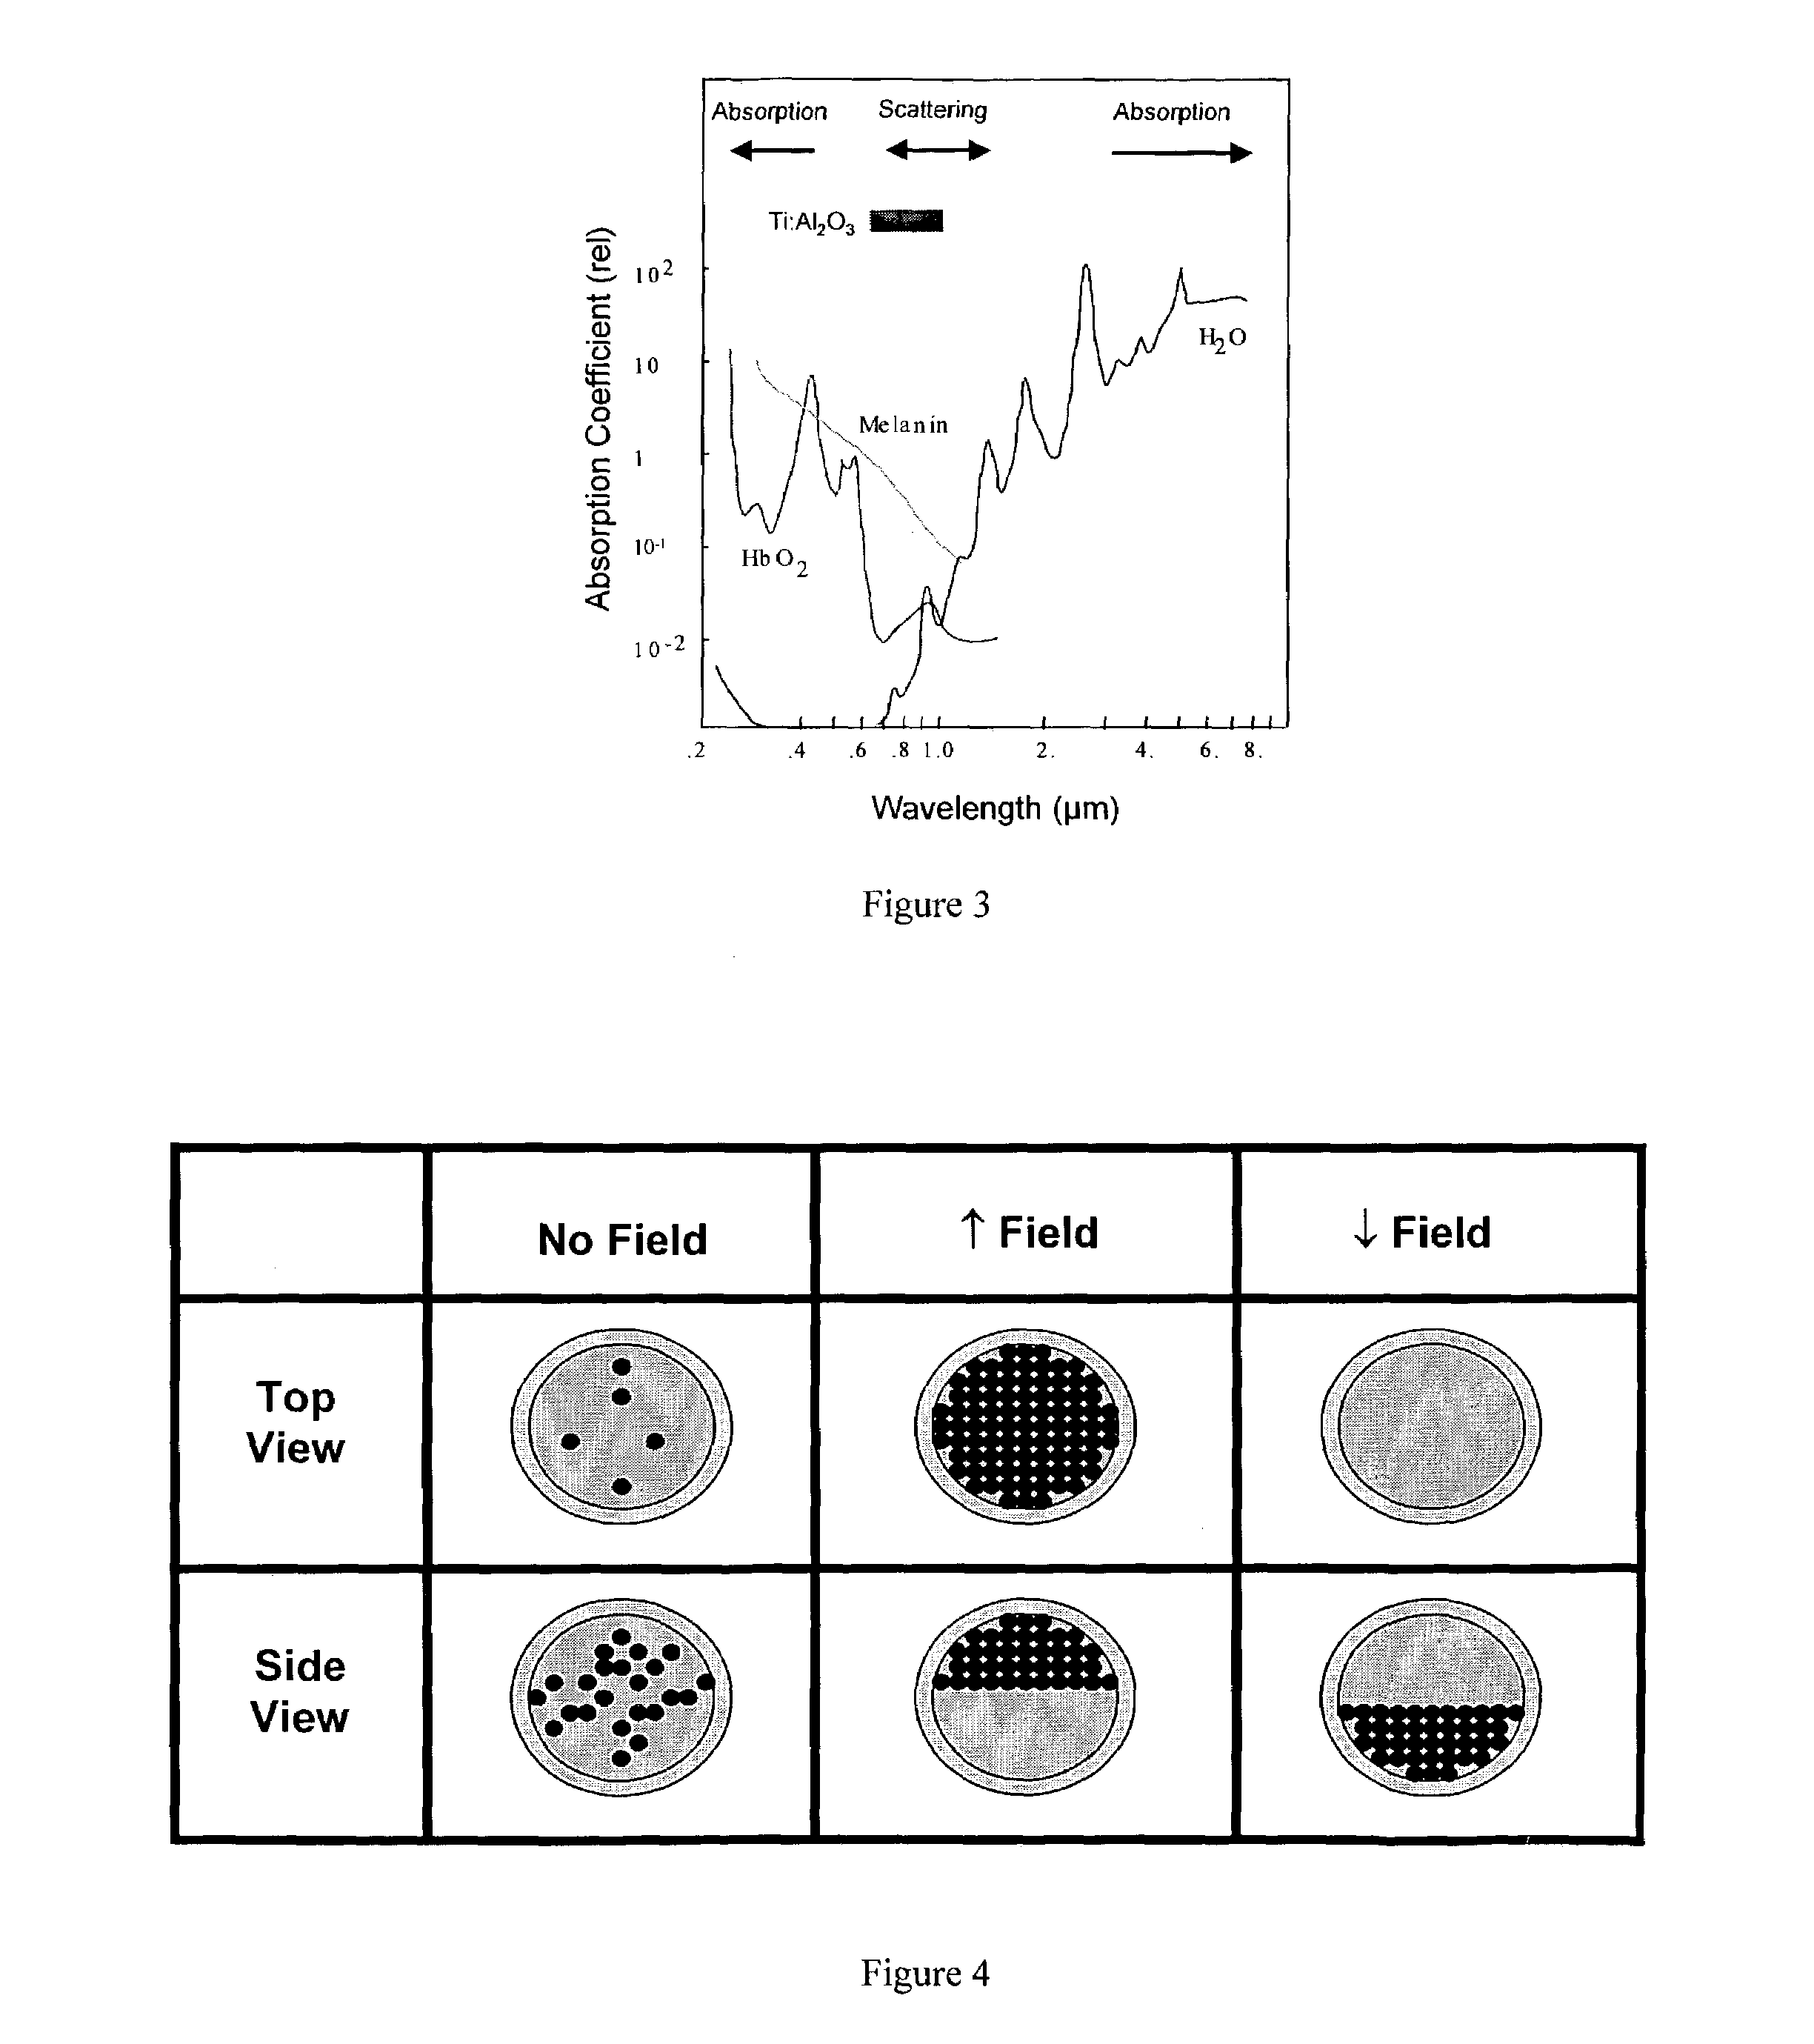 Optical contrast agents for optically modifying incident radiation